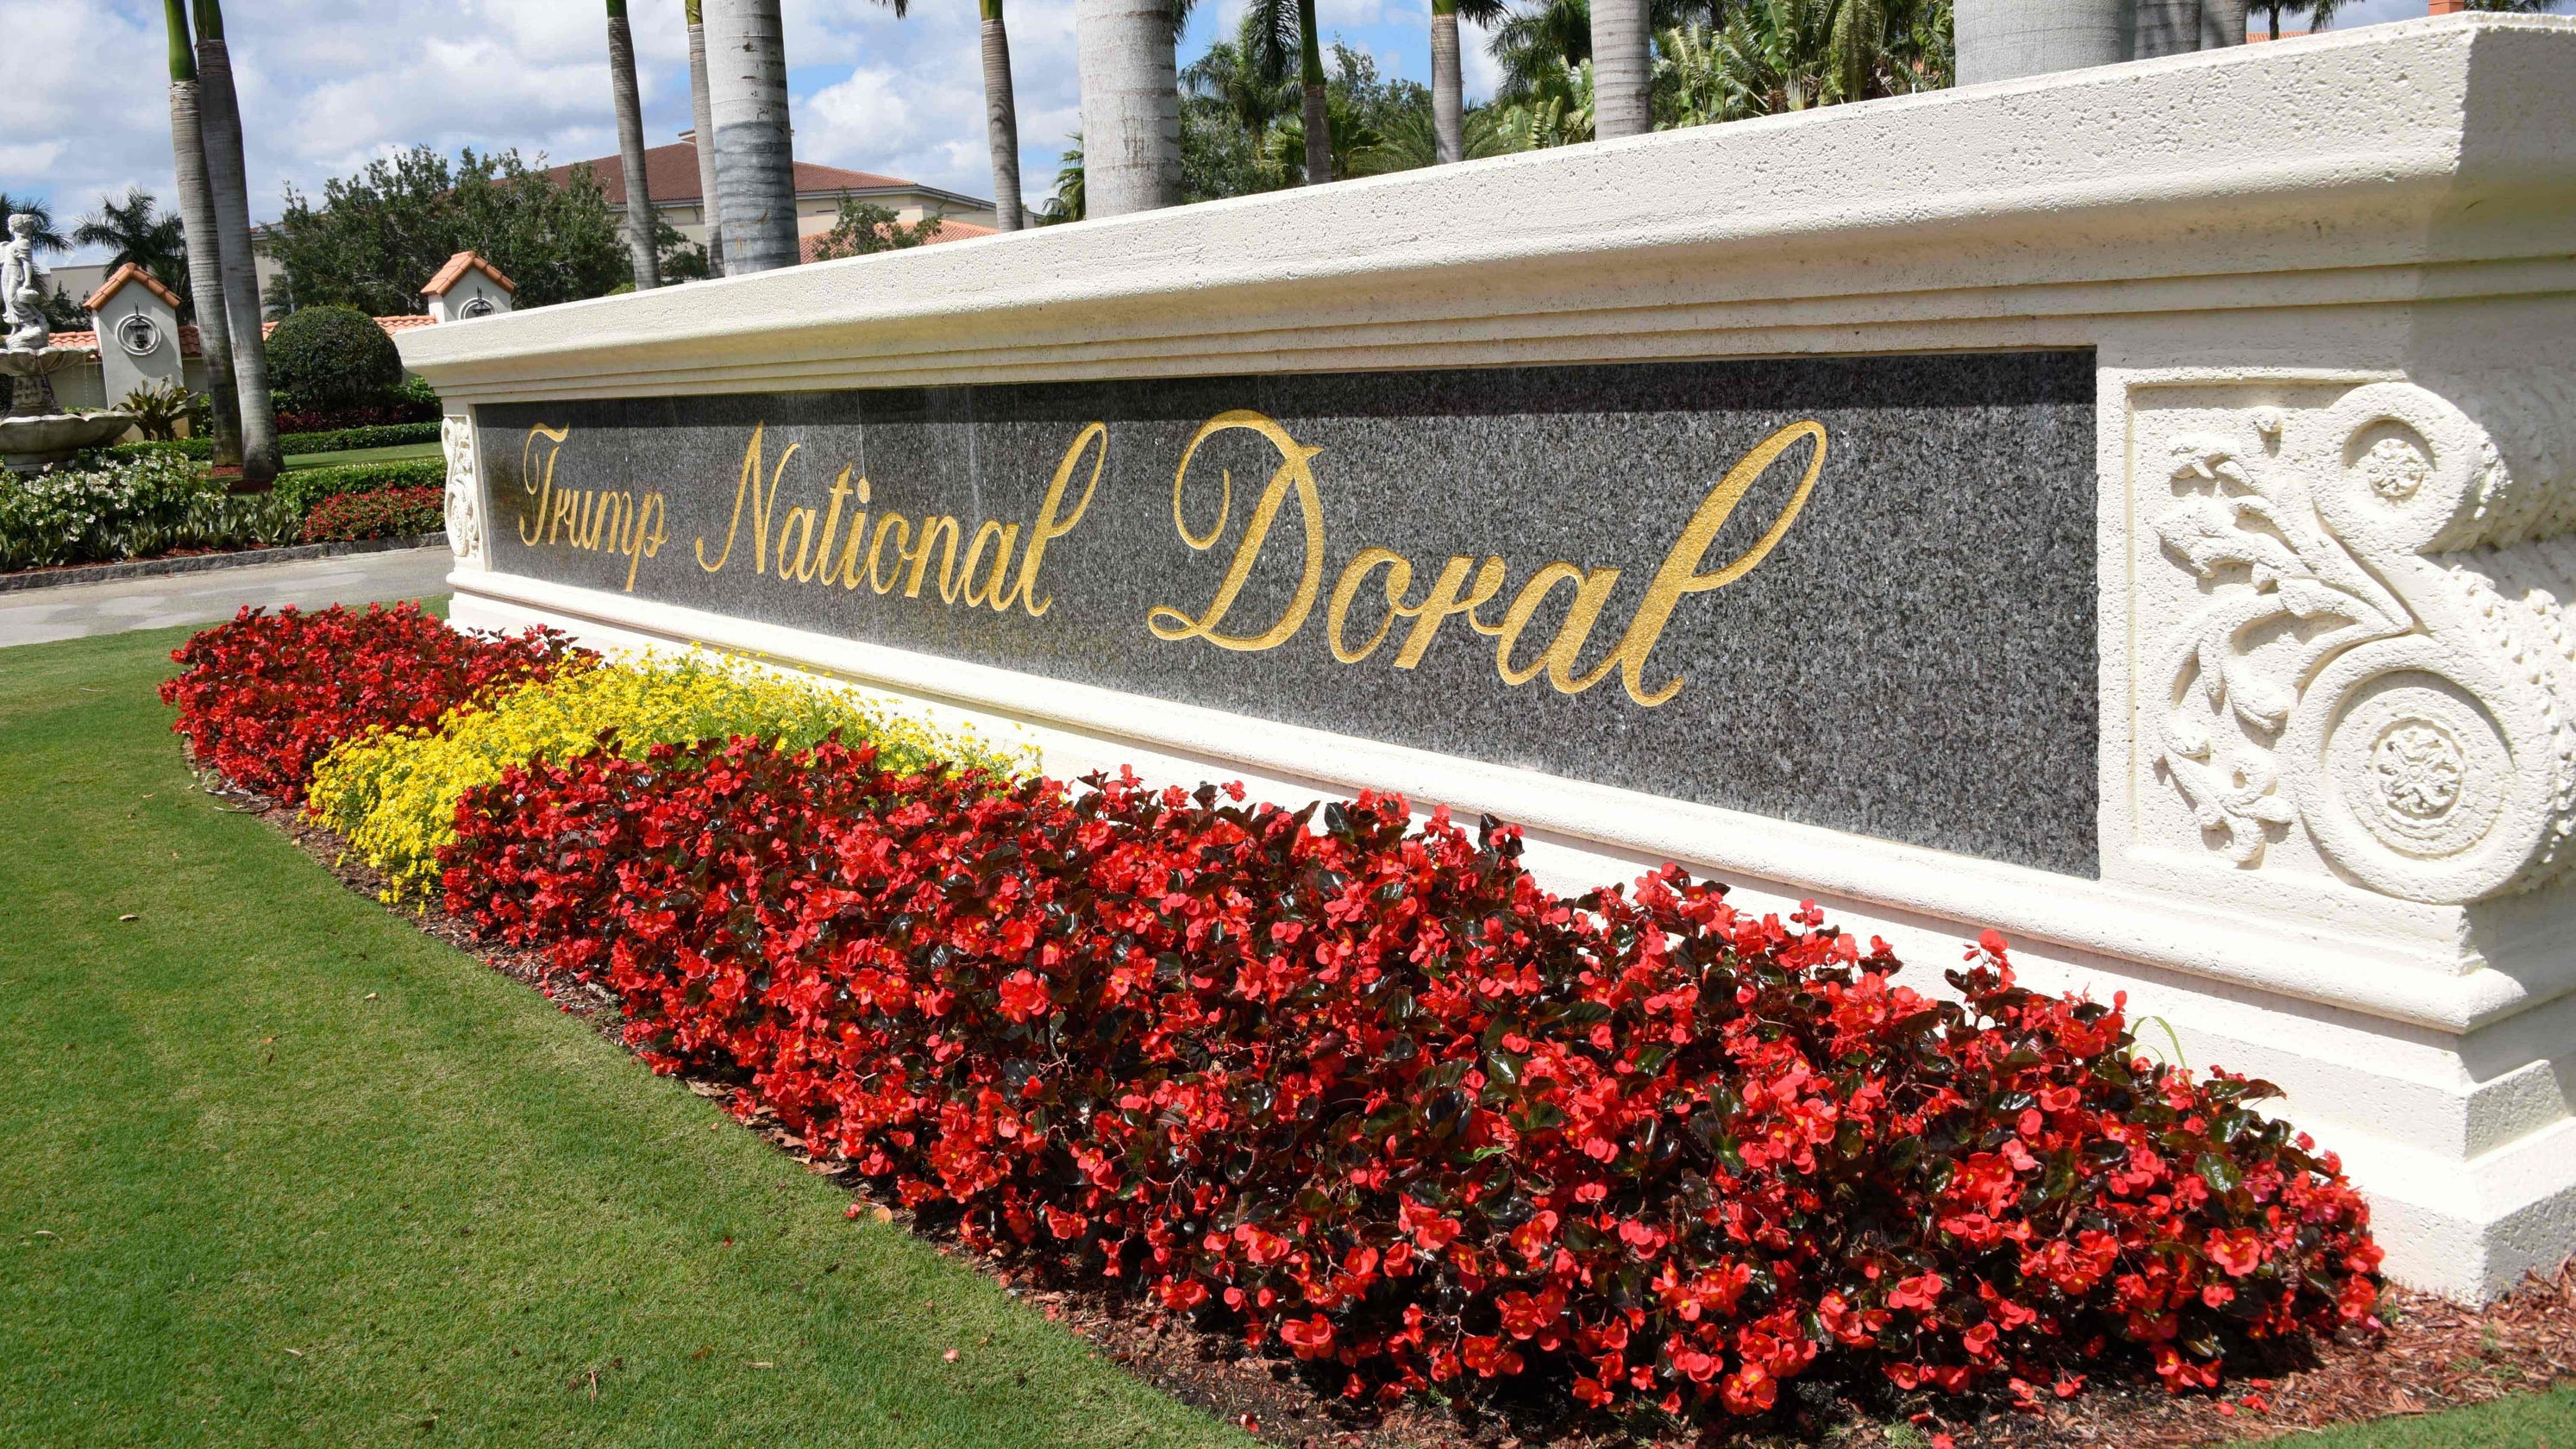 Whats On TV Trump’s unmatched sleaze: Grifters, women, trampling Constitution and now G-7 at Doral